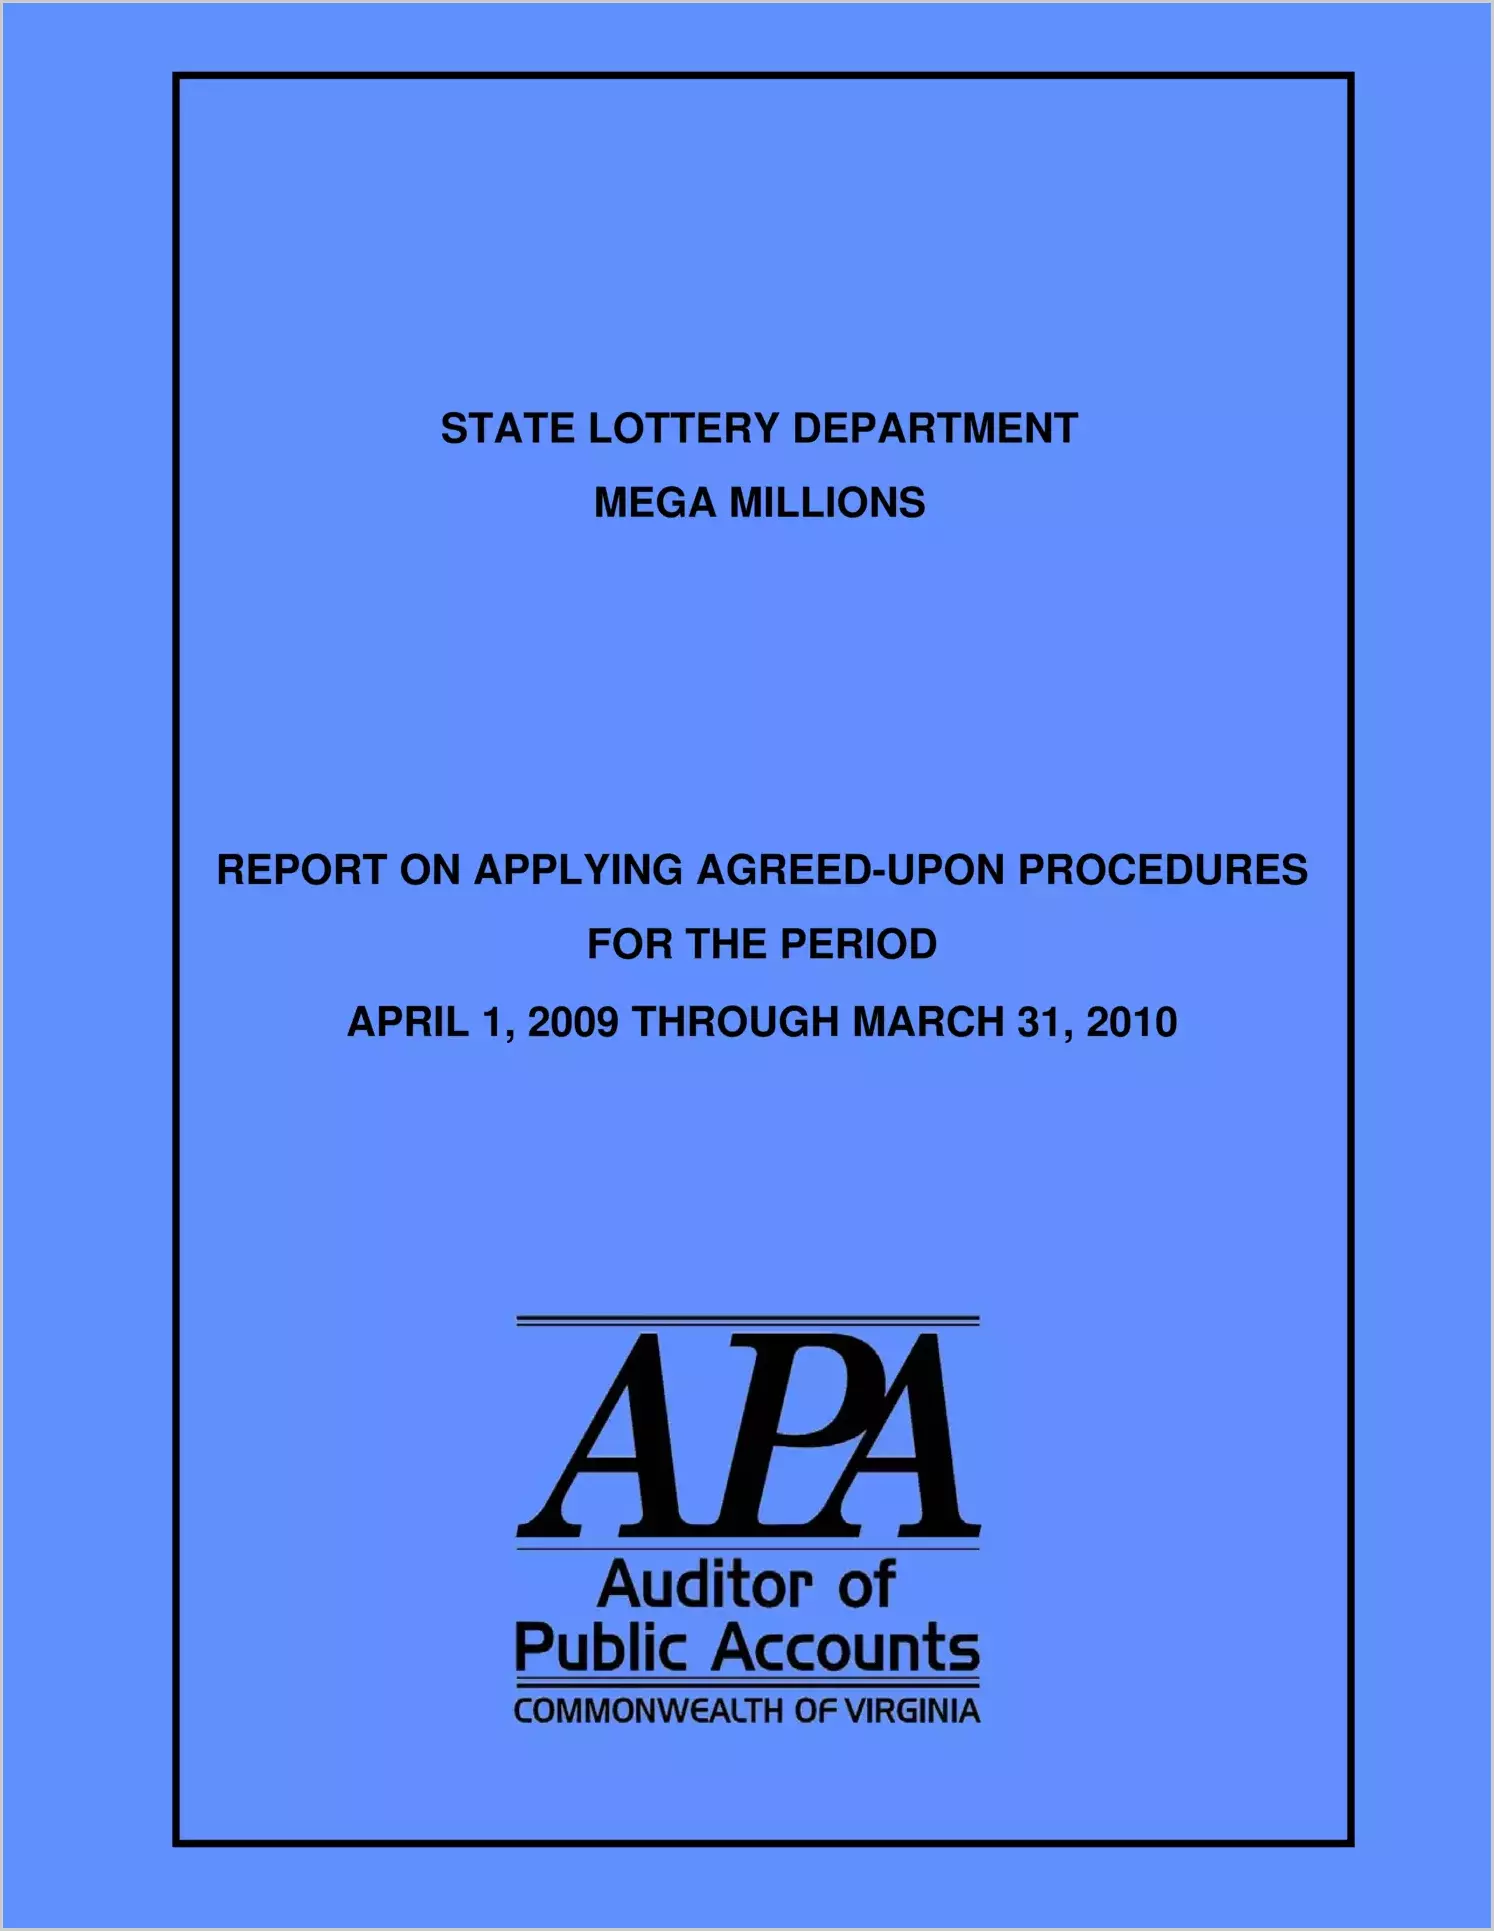 State Lottery Department Mega Millions report on Applying Agreed-Upon Procedures (MegaMillions) for the period April 1, 2009 throuhg March 31, 2010